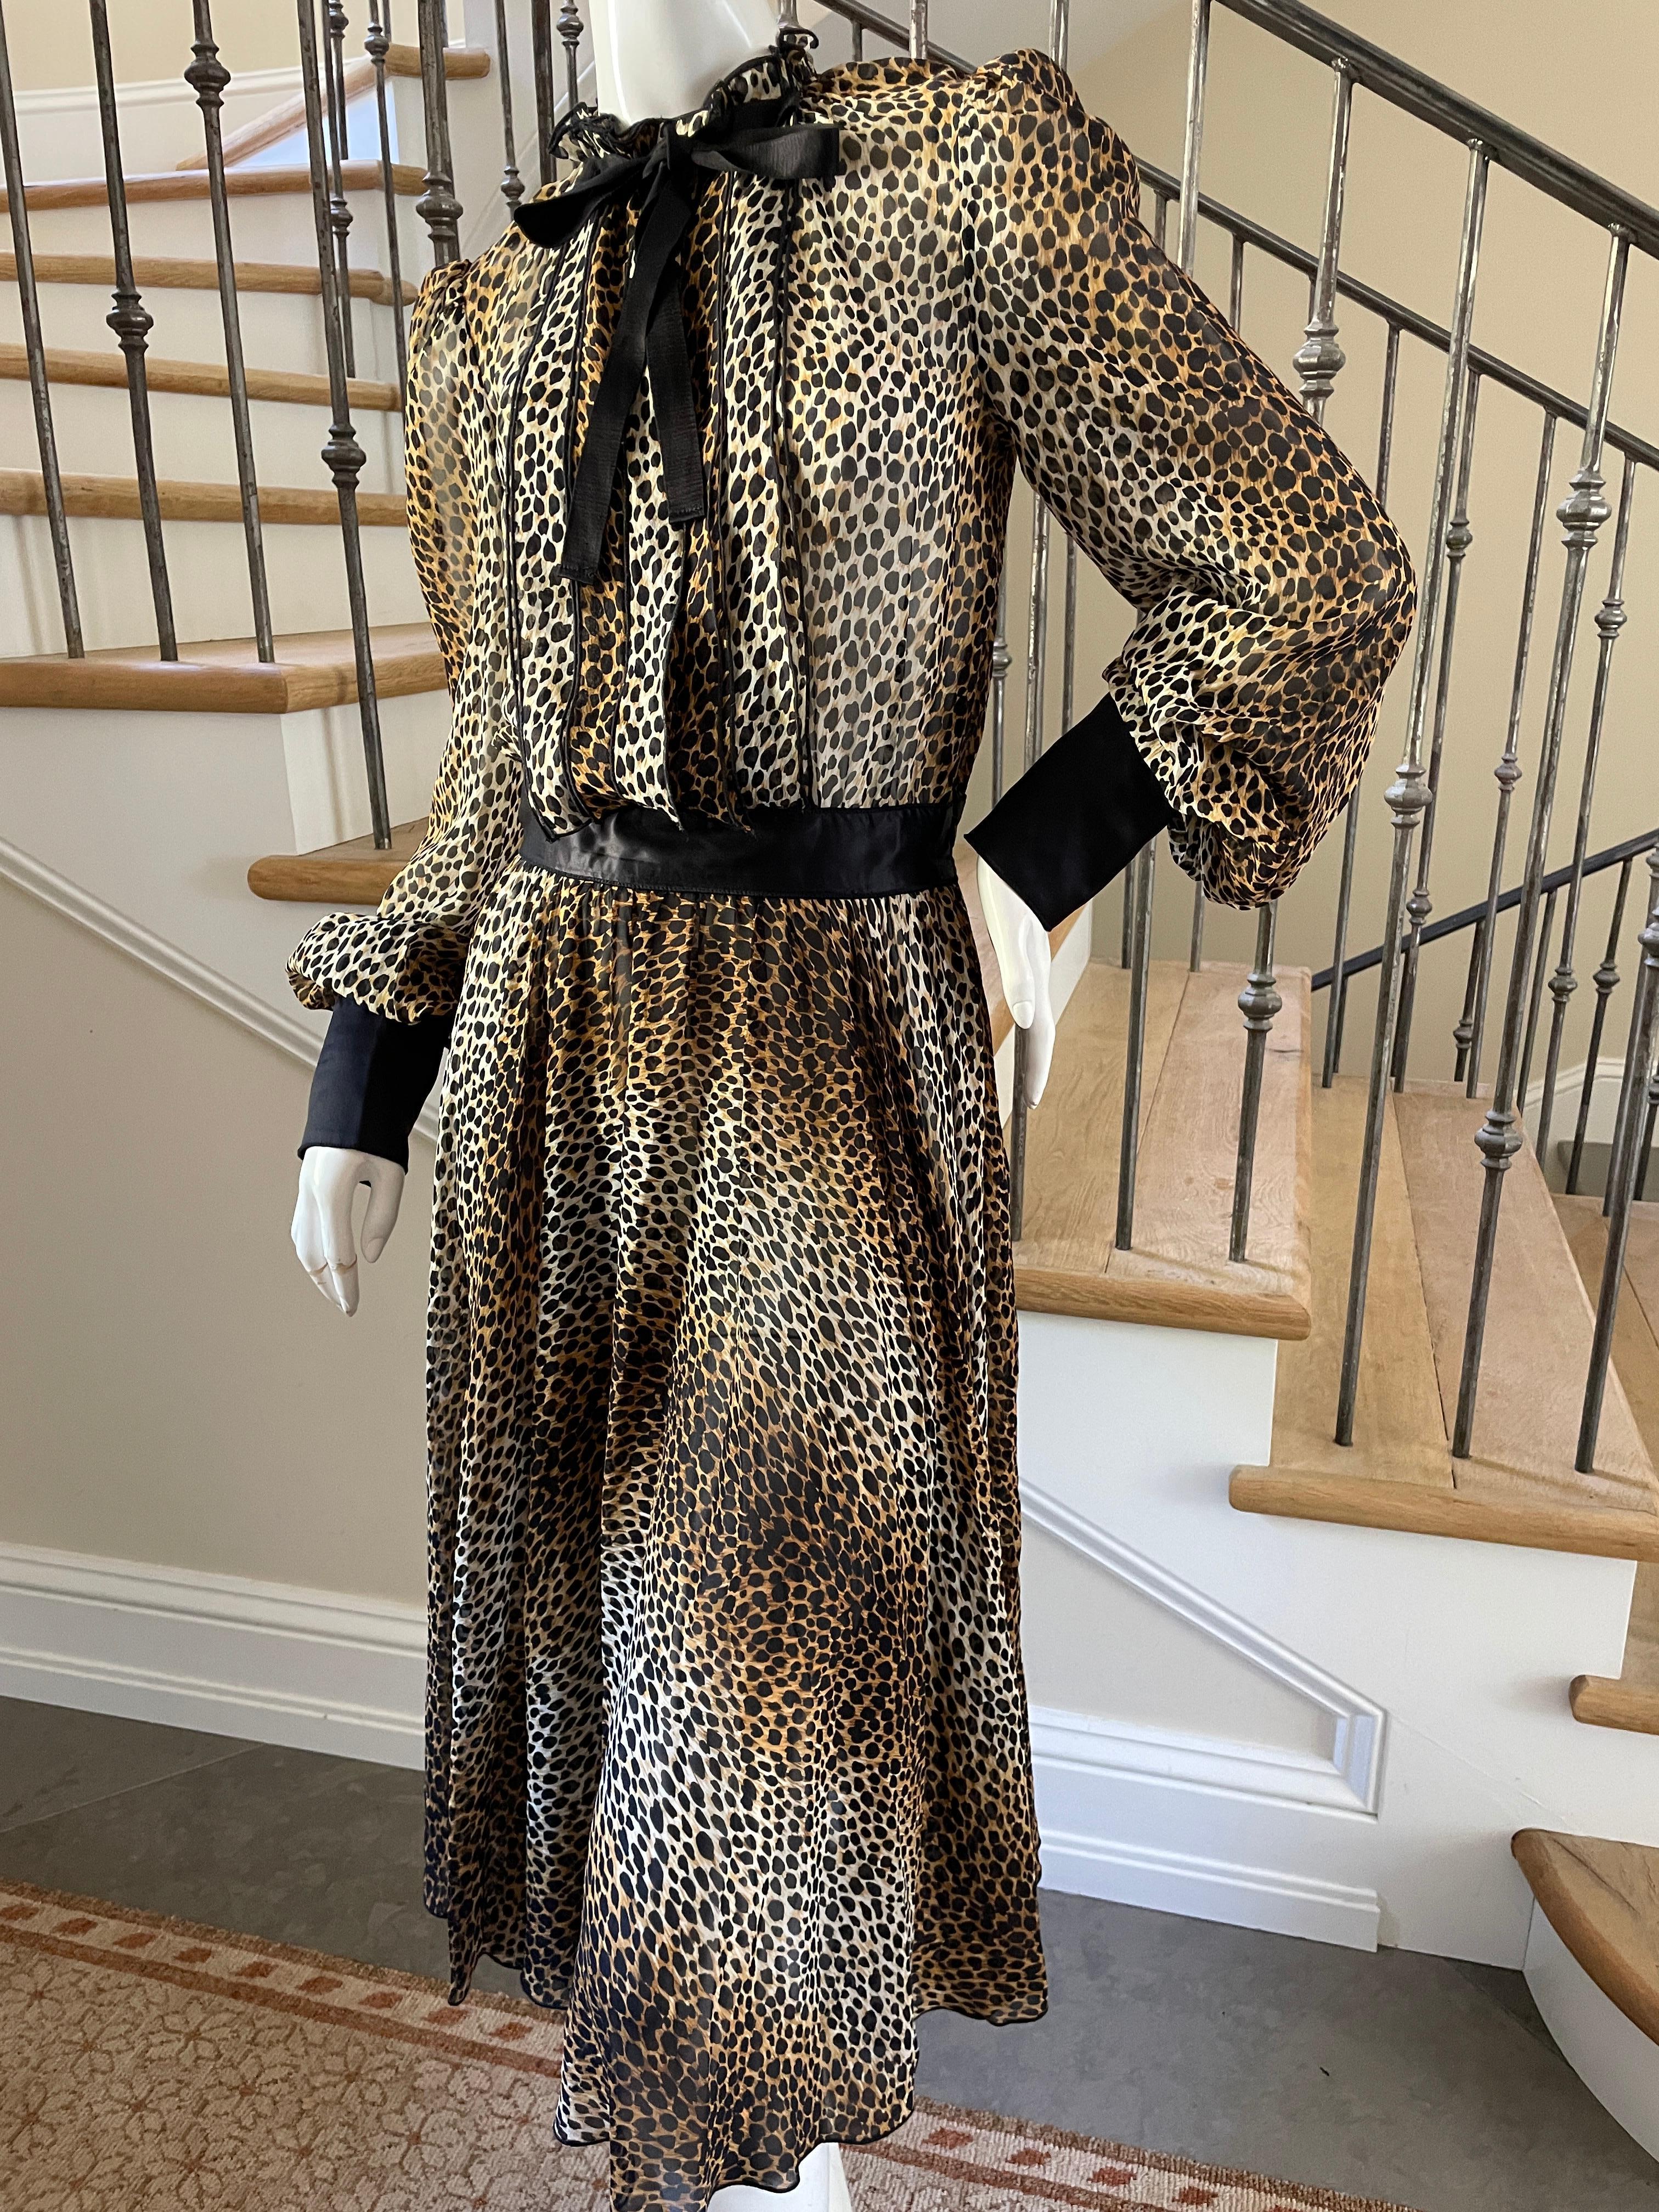 Dolce & Gabbana for D&G Sheer Silk Leopard Print Cocktail Dress .
 This is so wonderful, so sexy. the photos don't do it justice.
Comes with slip.
Size 38 appx , size and fabric label removed
  Bust 36